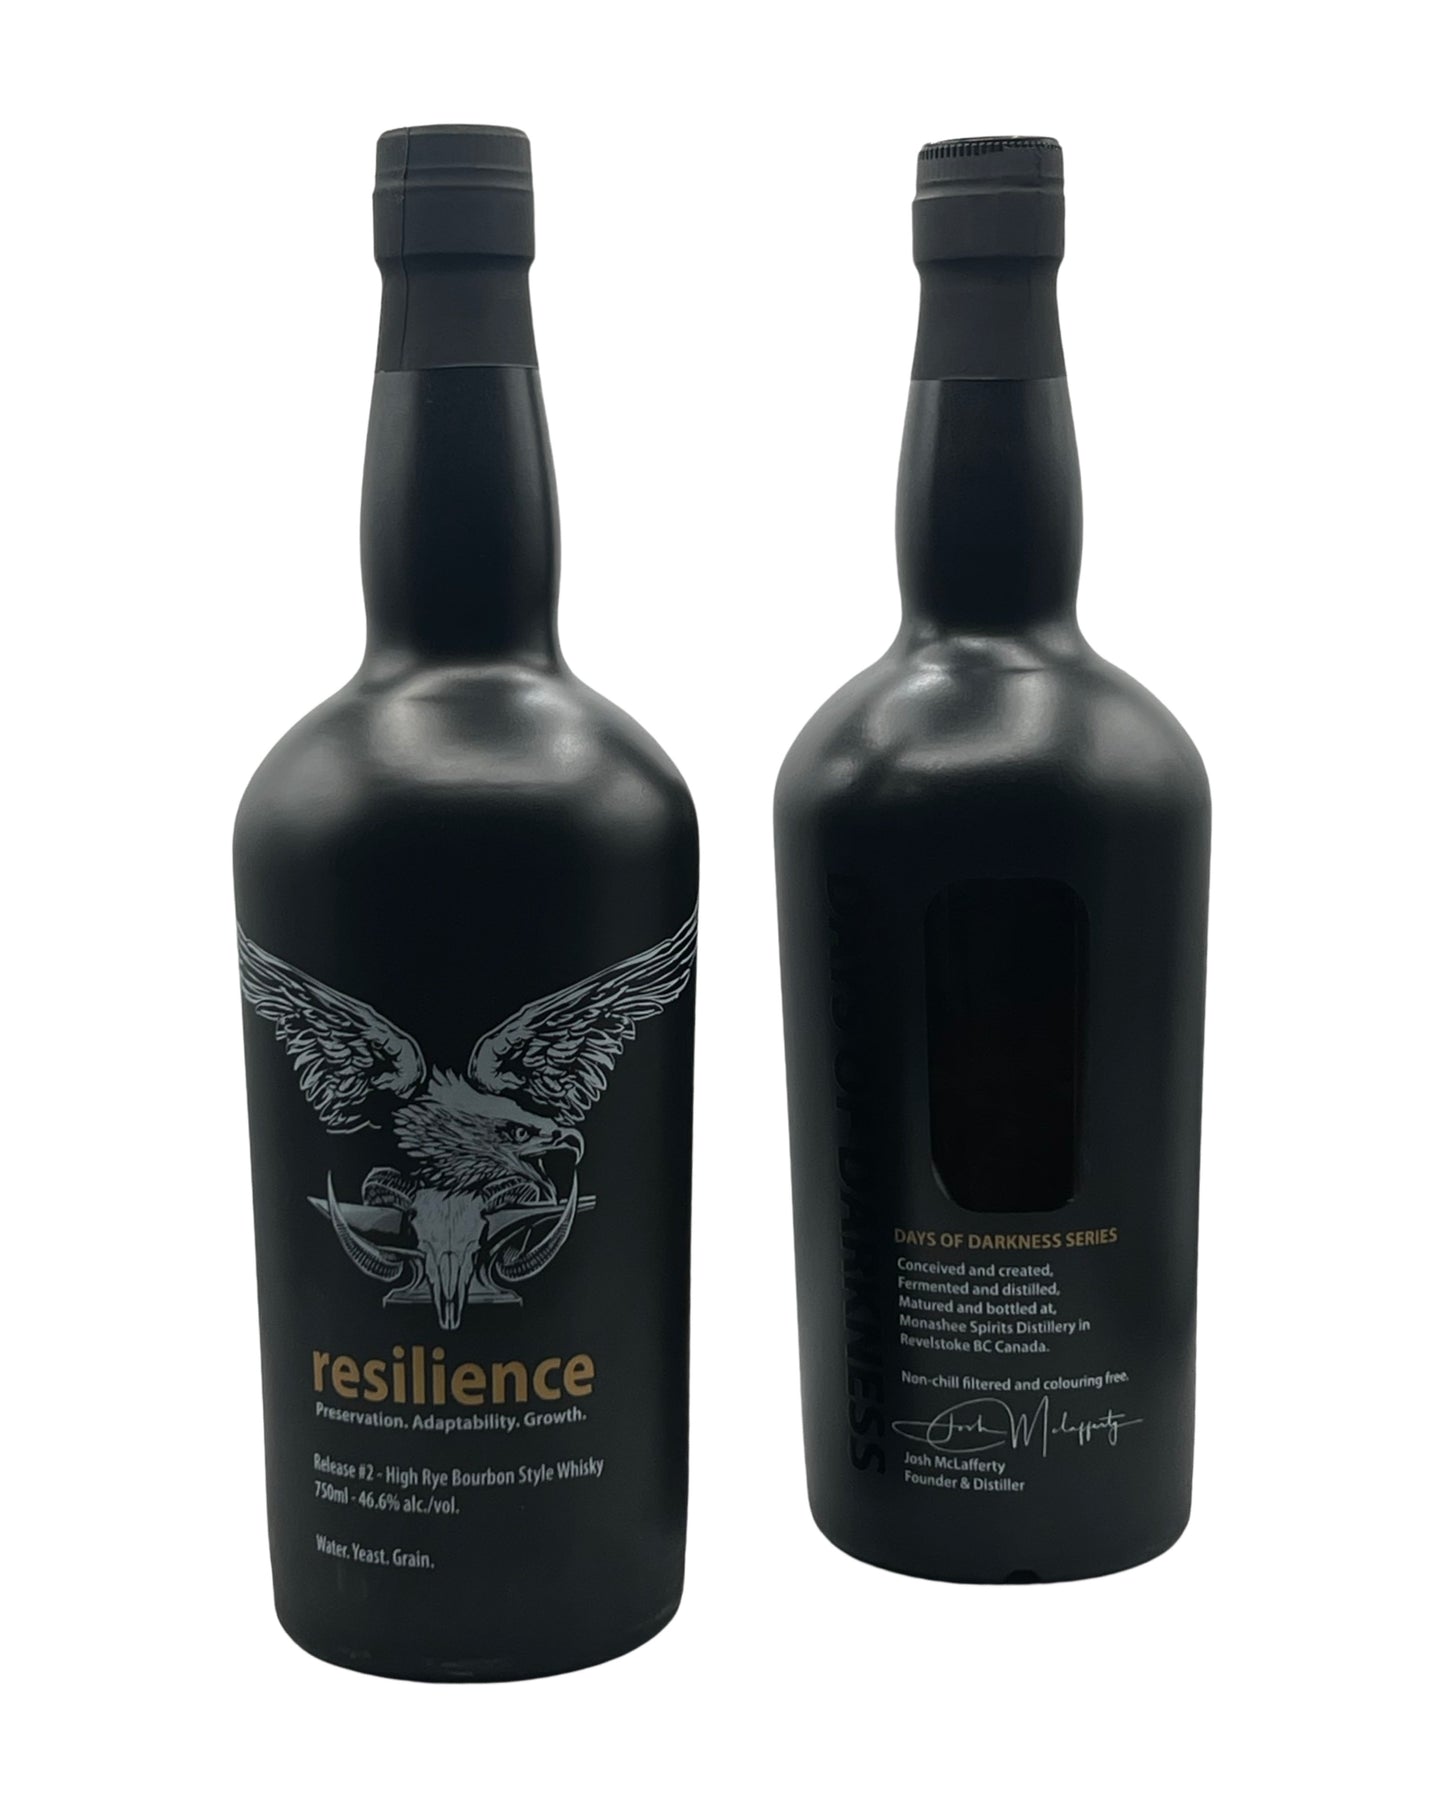 WHISKY - Days of Darkness - Release #2 - Resilience - High Rye Bourbon